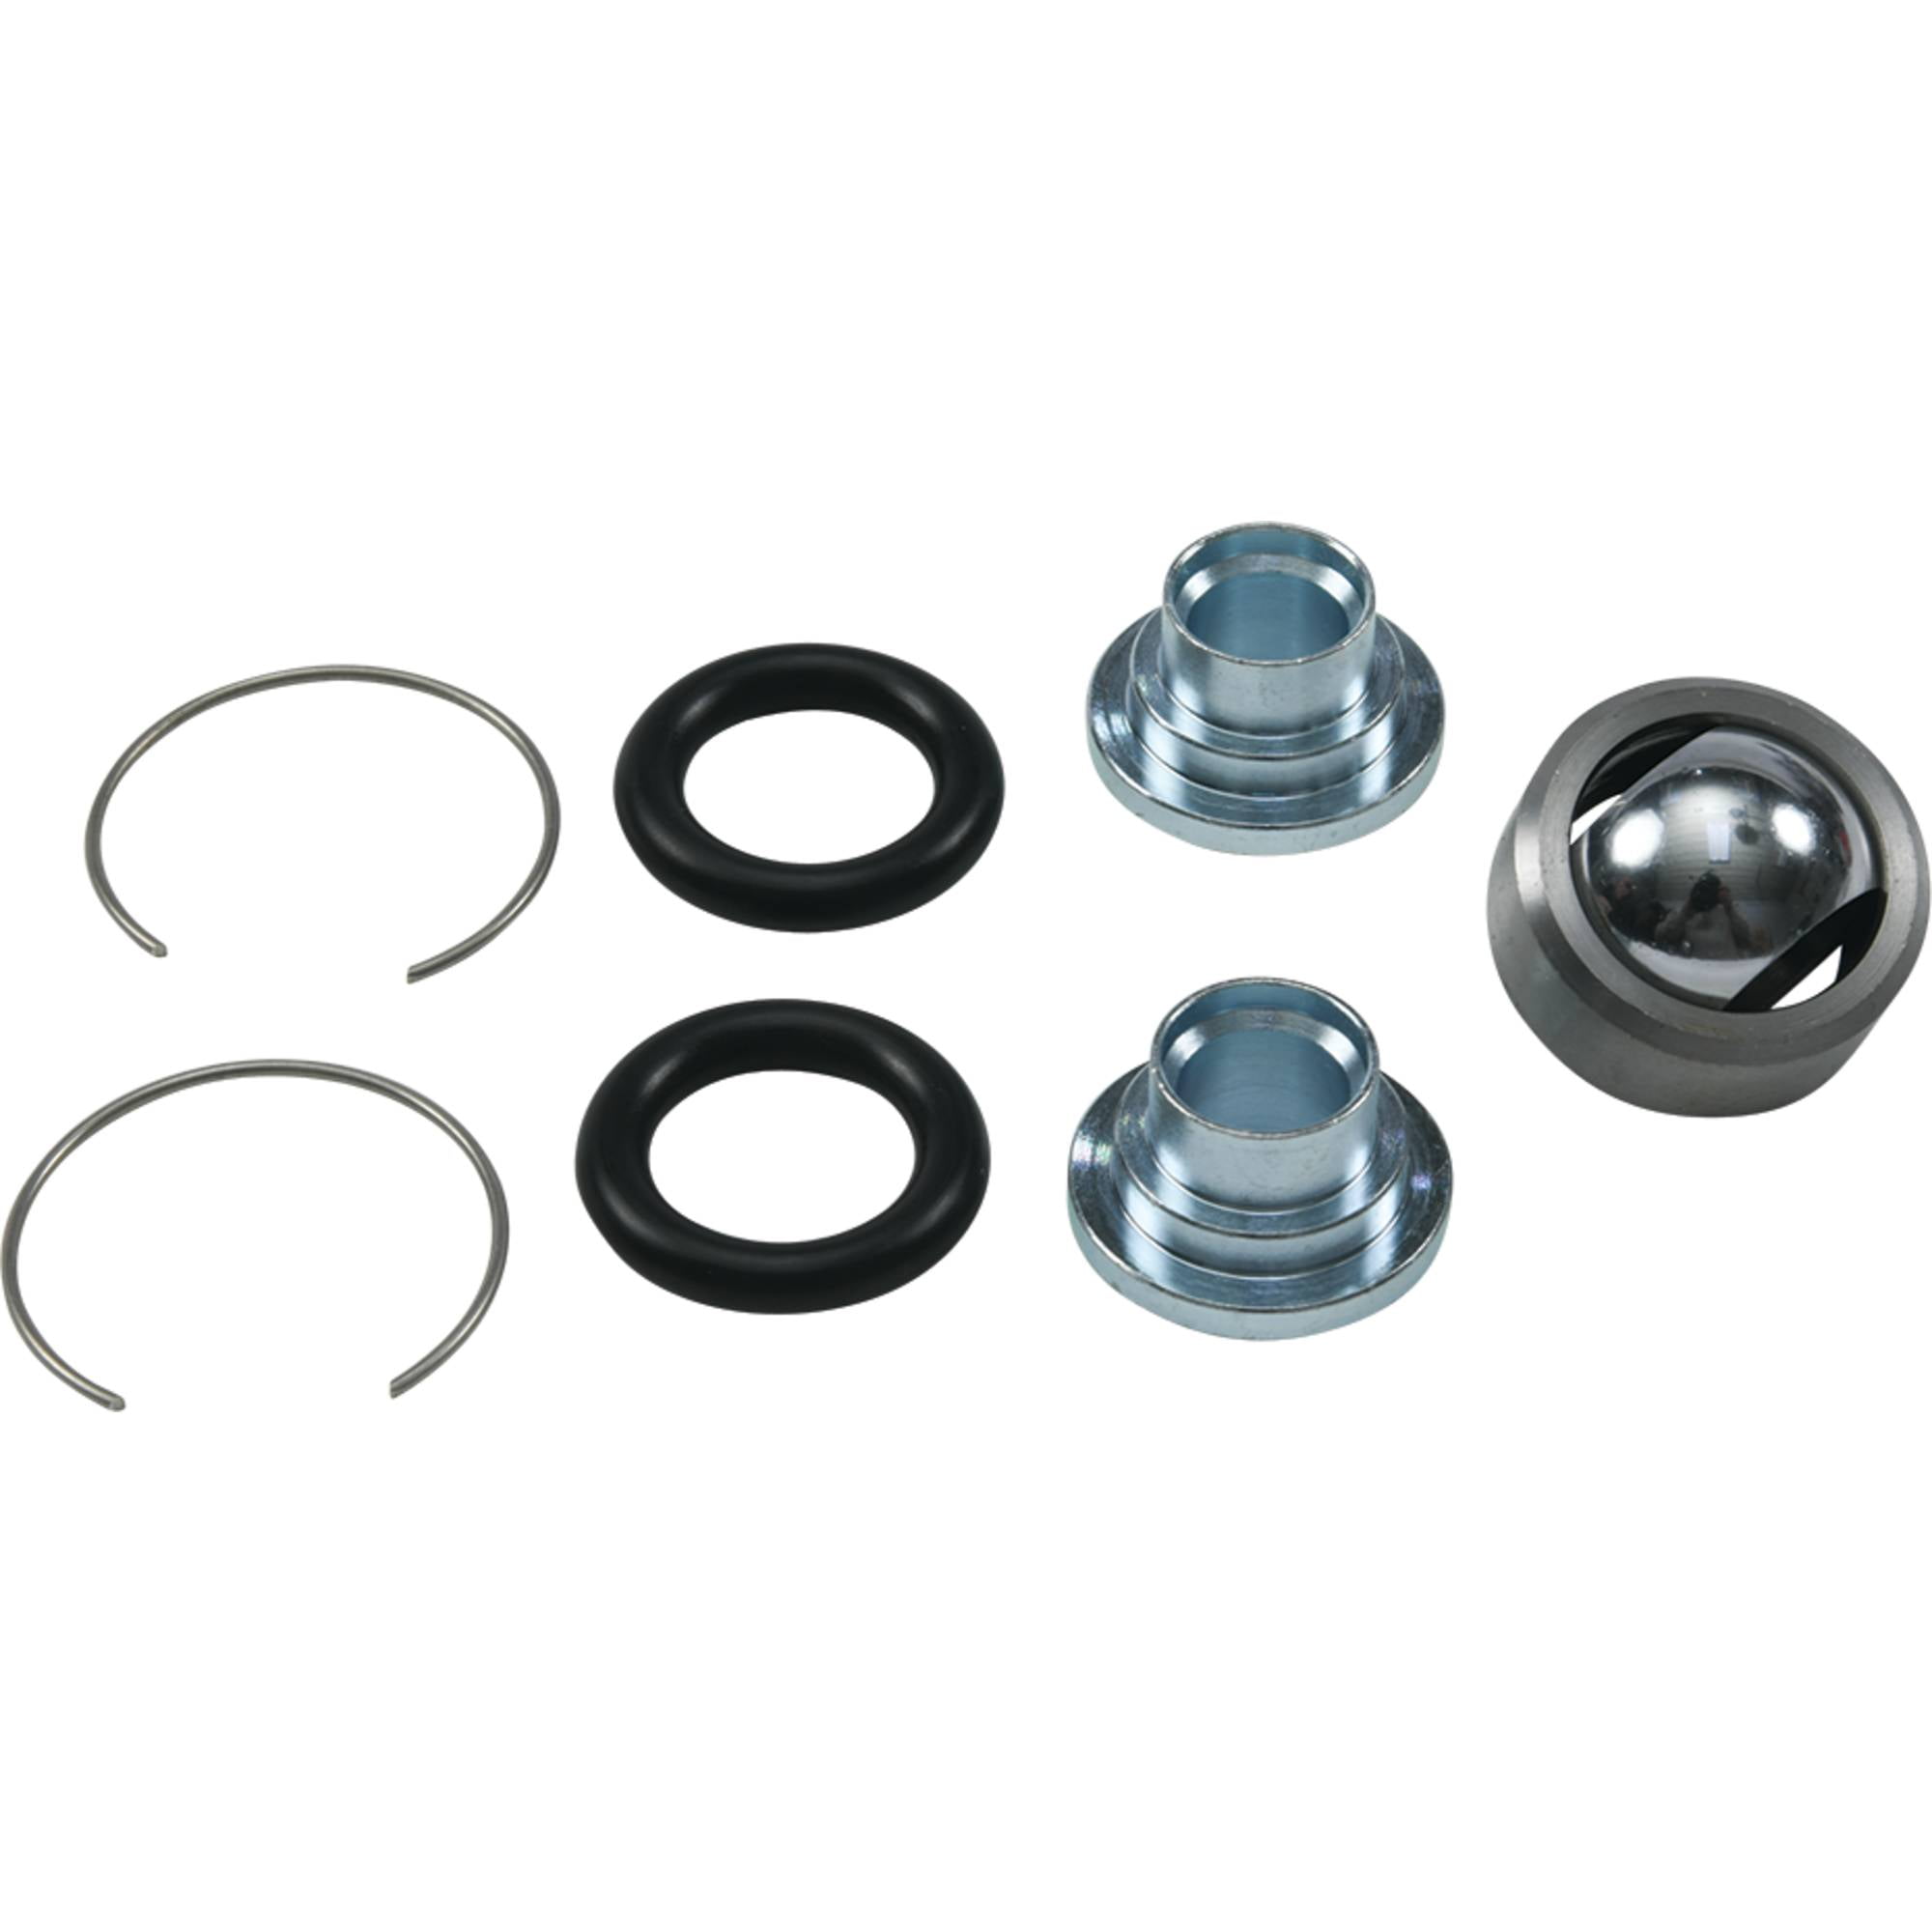 21-0024 New All Balls Shock Bearing Kit Maverick X3 MAX TURBO RR XDS 2020 Maverick X3 TURBO RR XMR 2020 Compatible with/Replacement For Can-Am Maverick MAX 1000 TURBO XDS 2017